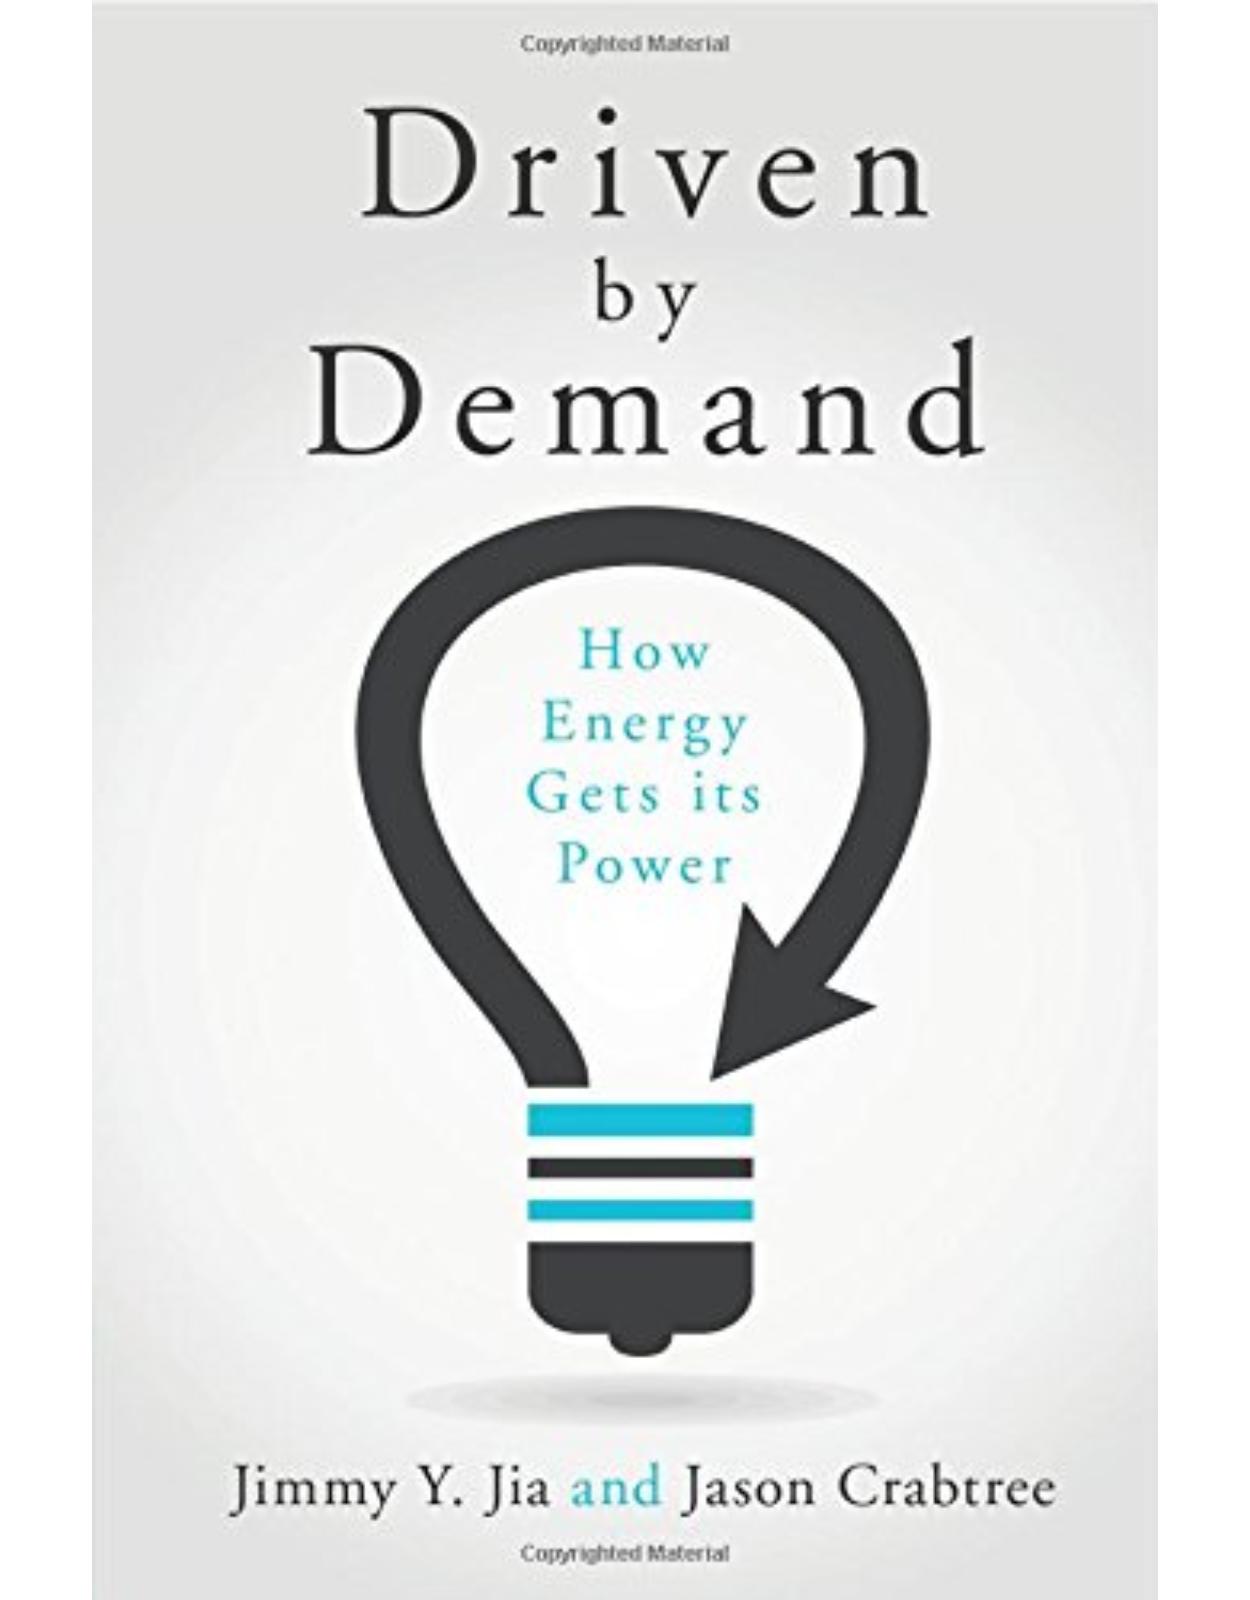 Driven by Demand: How Energy Gets its Power